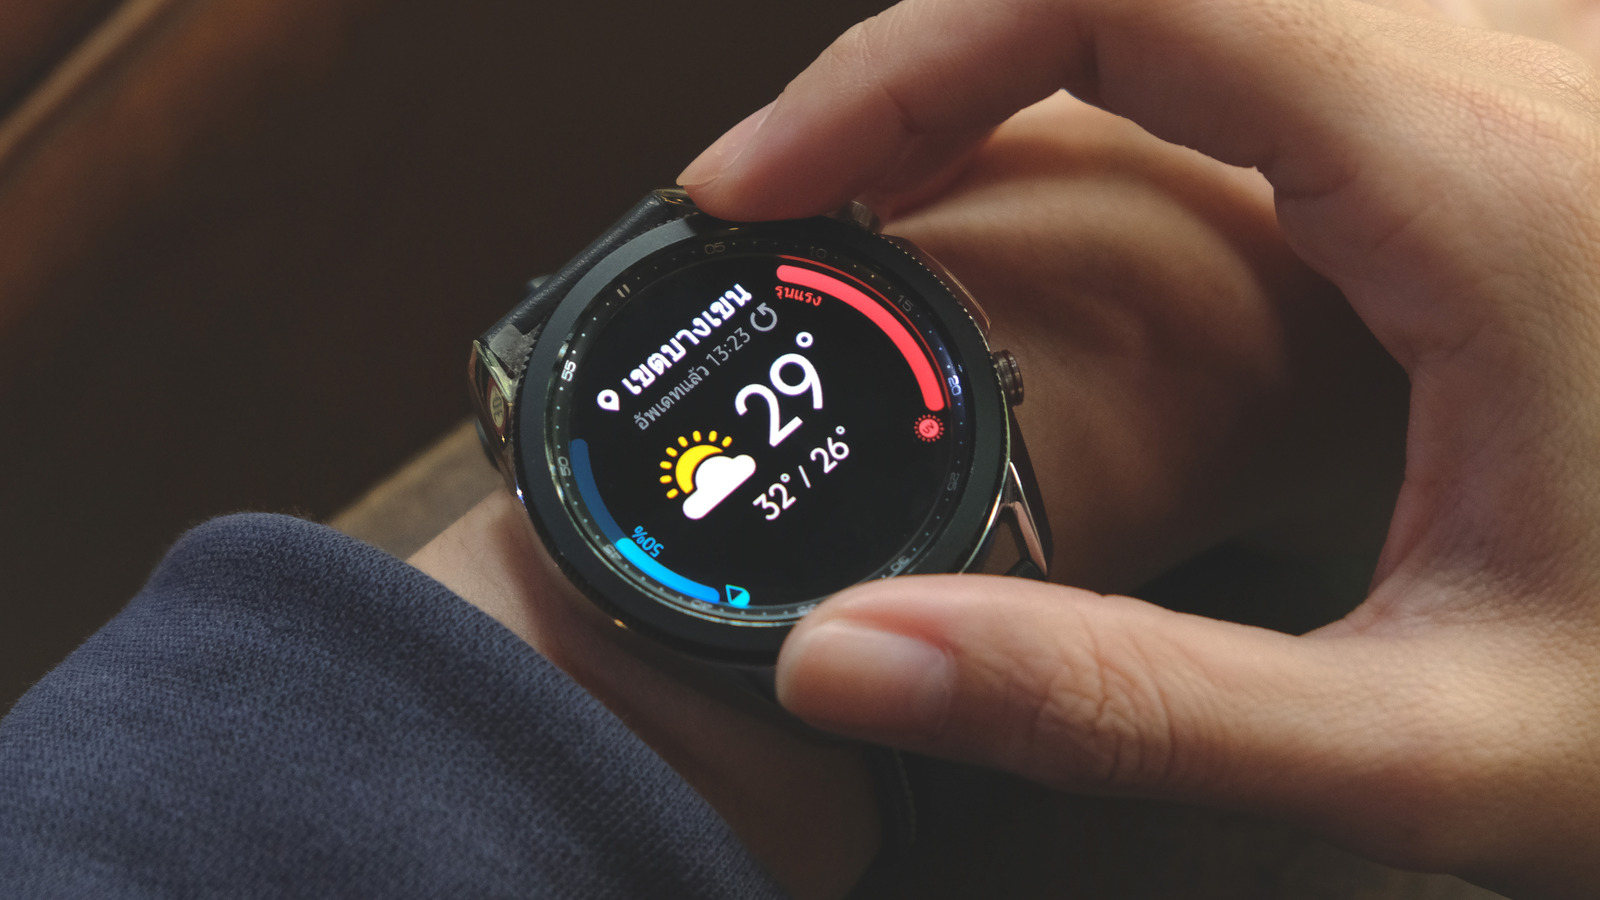 Samsung is rumored to be working on the Galaxy Watch 5 Pro Edition